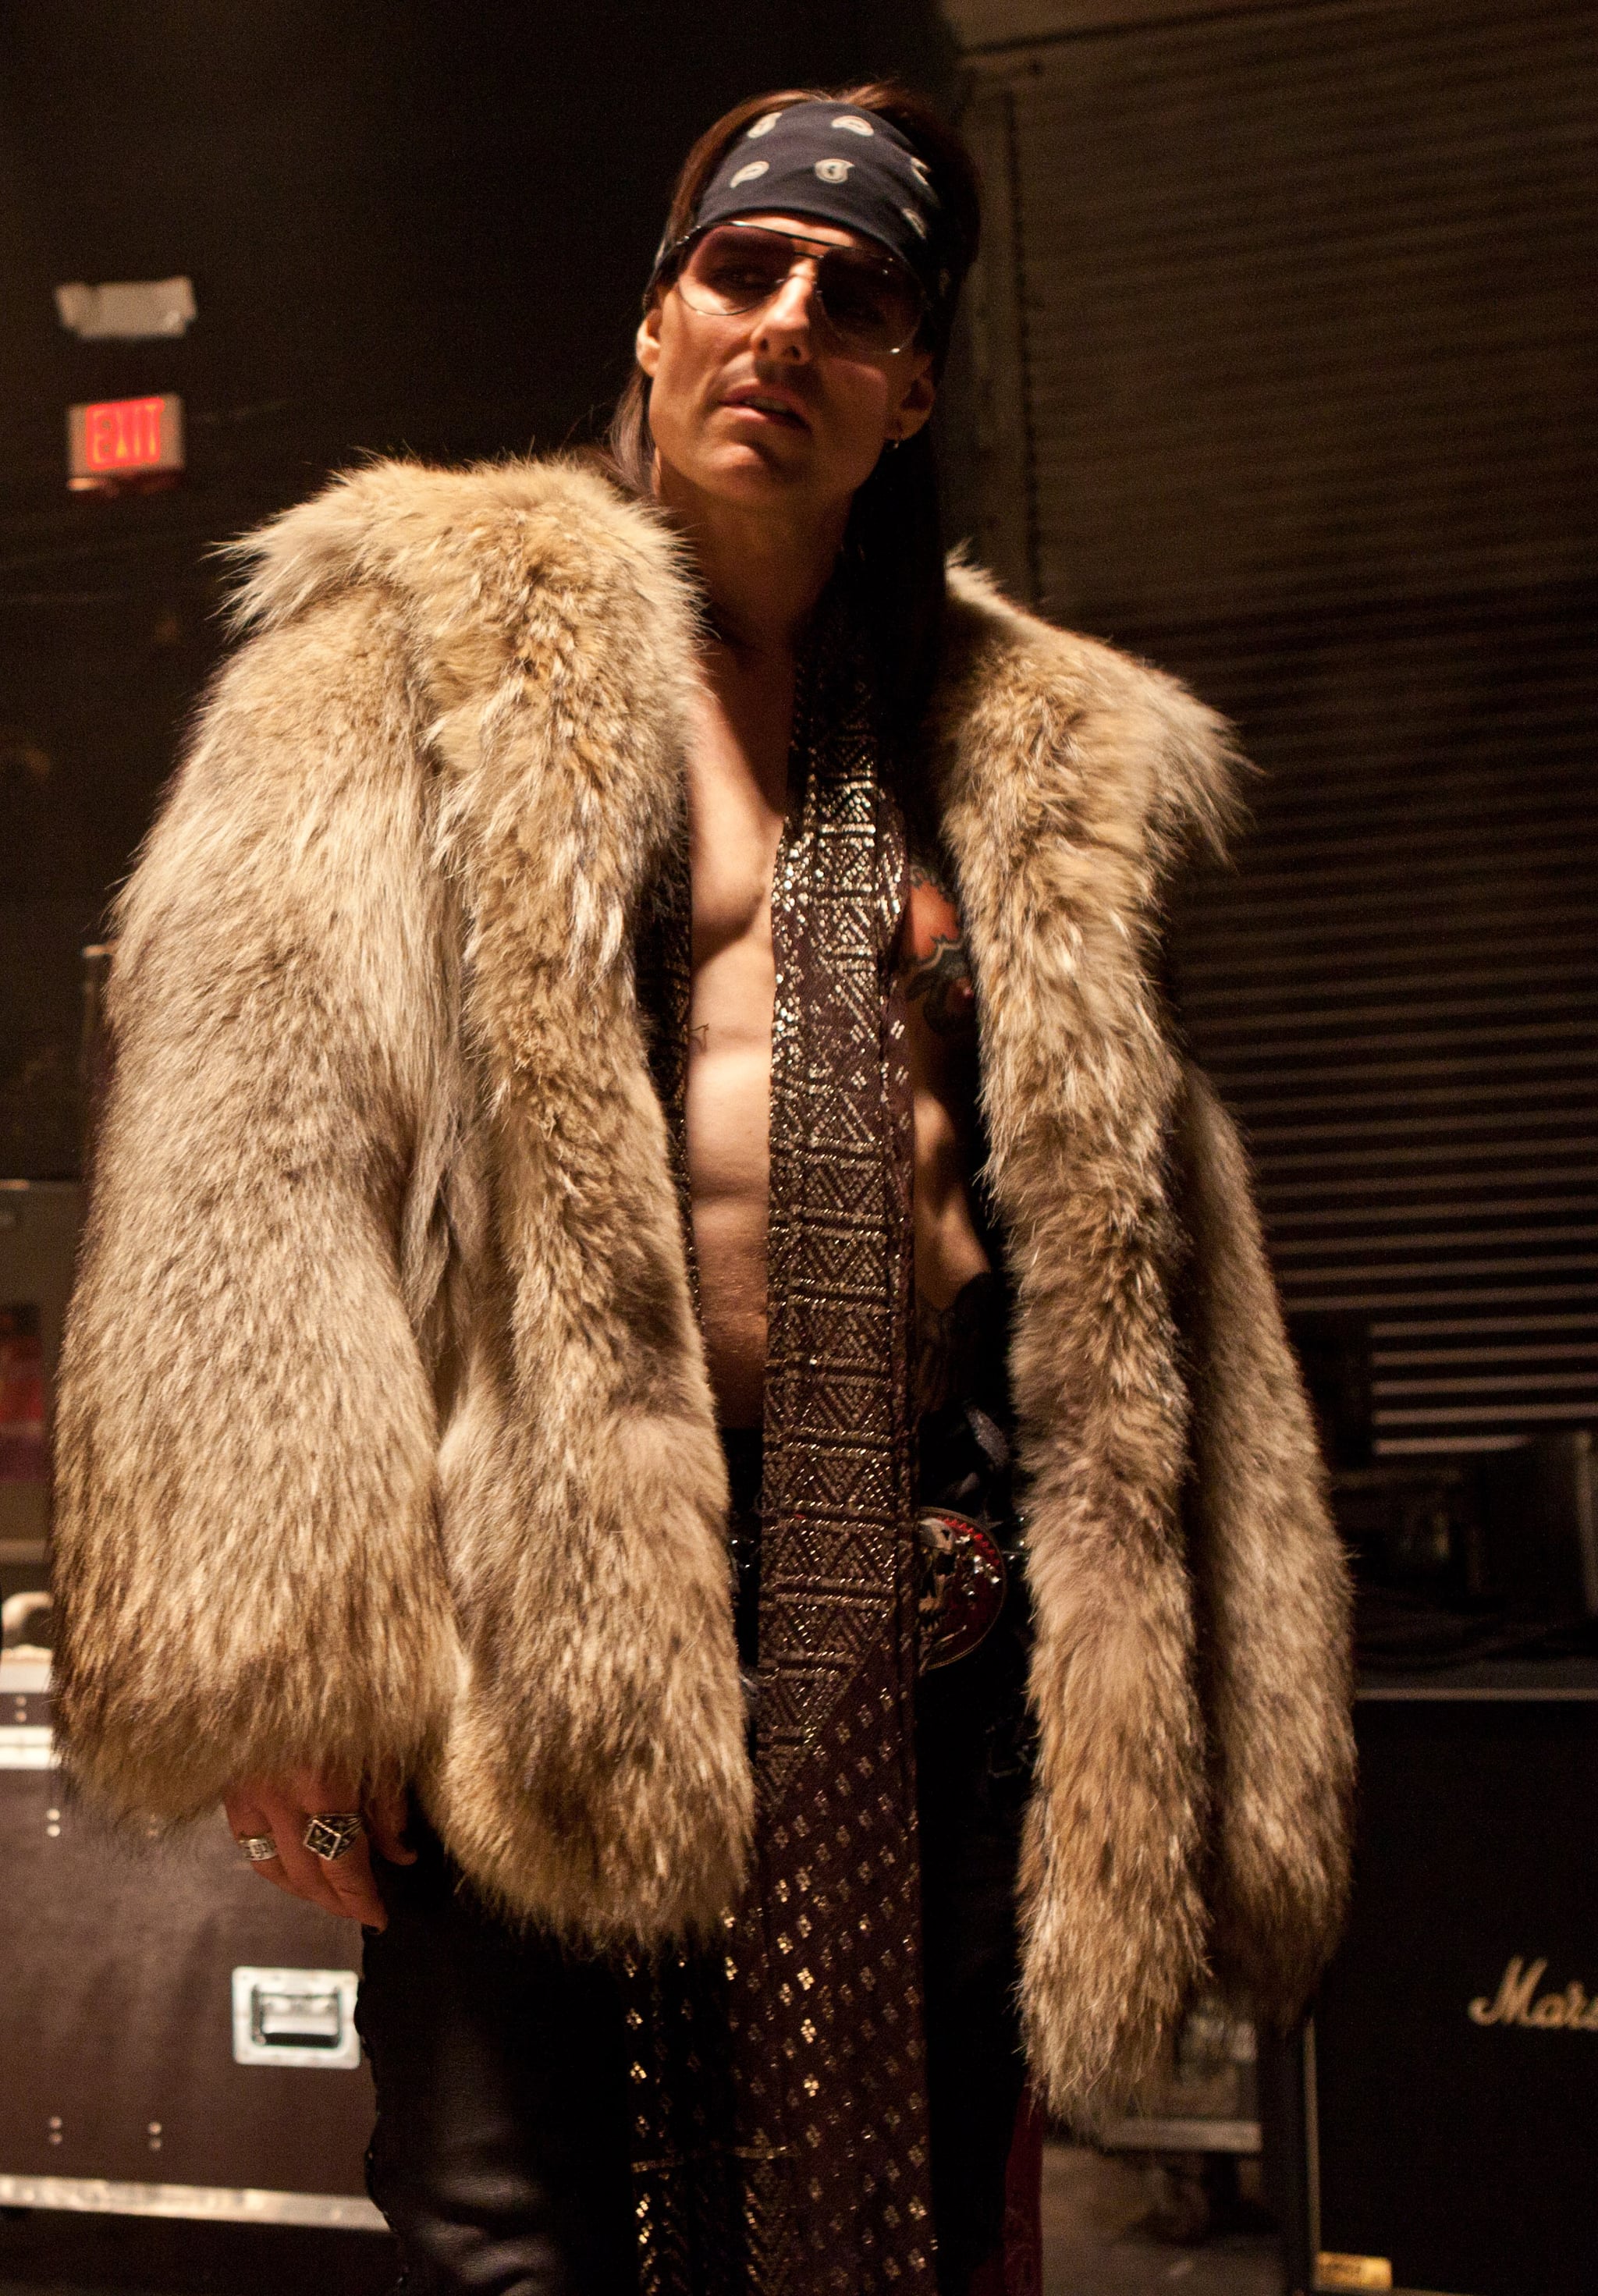 Stacee Jaxx From Rock Of Ages Pop Culture Halloween Costume Ideas 